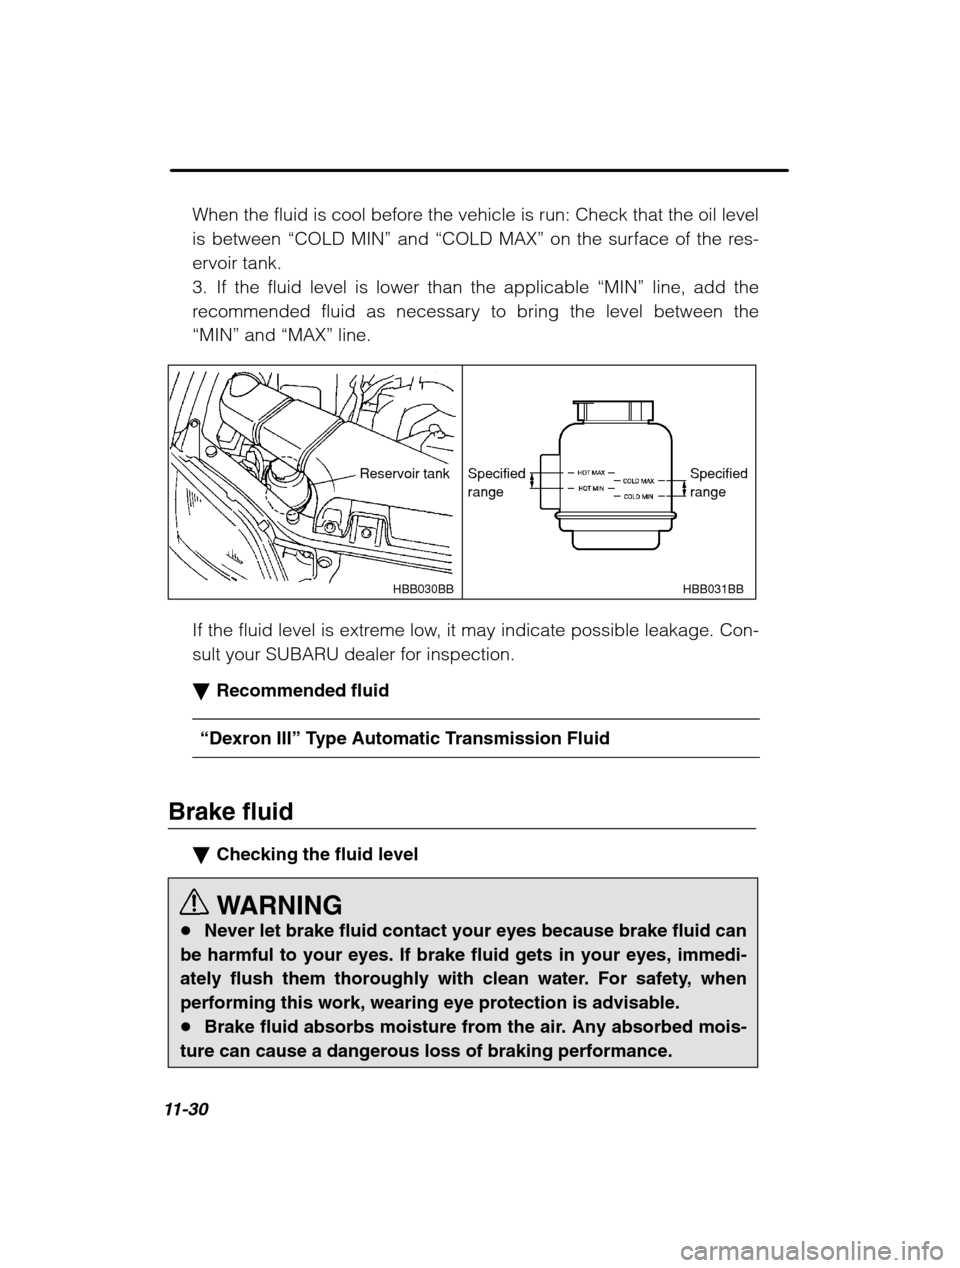 SUBARU LEGACY 2002 3.G Owners Manual 11-30
When the fluid is cool before the vehicle is run: Check that the oil level is between “COLD MIN ” and  “COLD MAX ” on the surface of the res-
ervoir tank.
3. If the fluid level is lower 